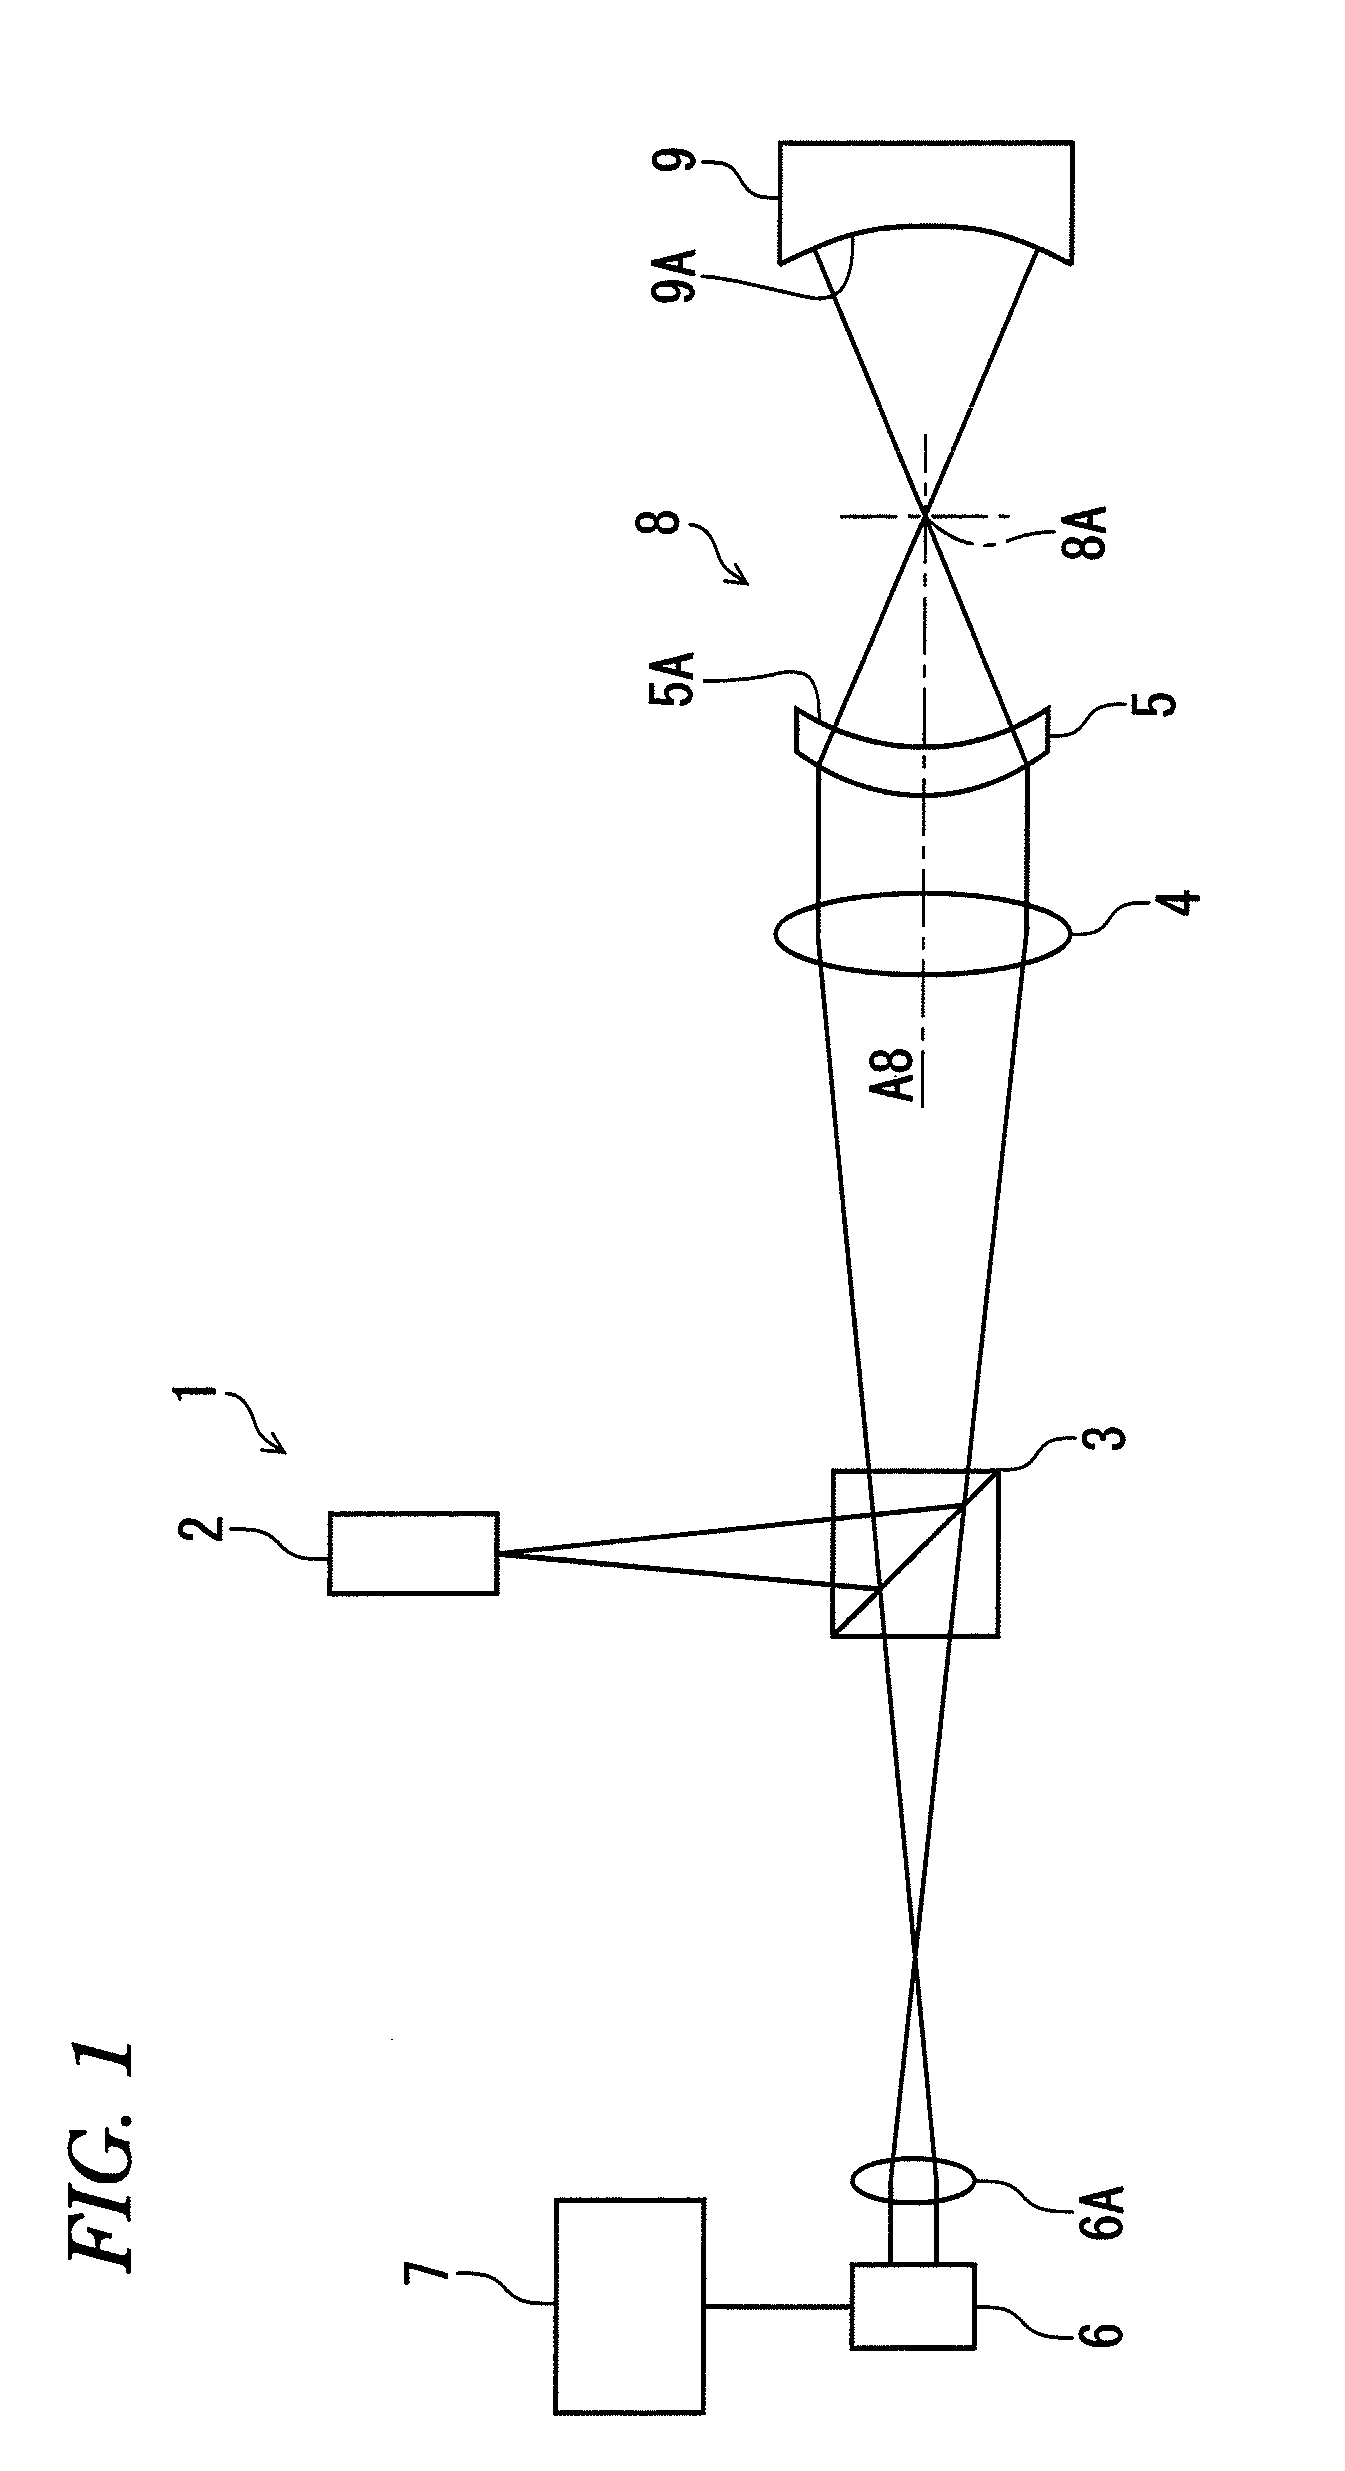 Abscissa calibration jig and abscissa calibration method of laser interference measuring apparatus